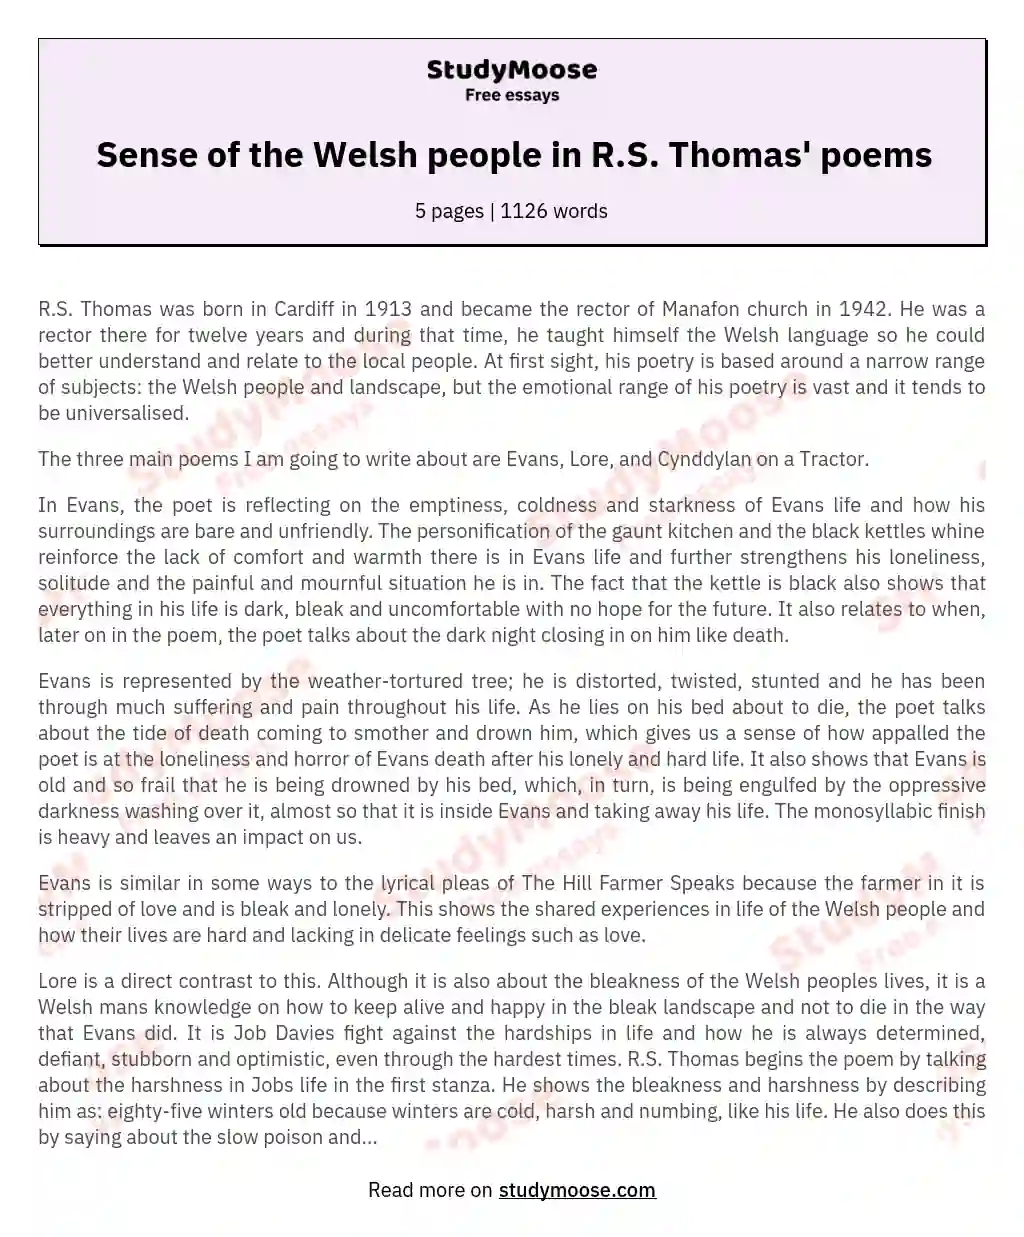 Sense of the Welsh people in R.S. Thomas' poems essay